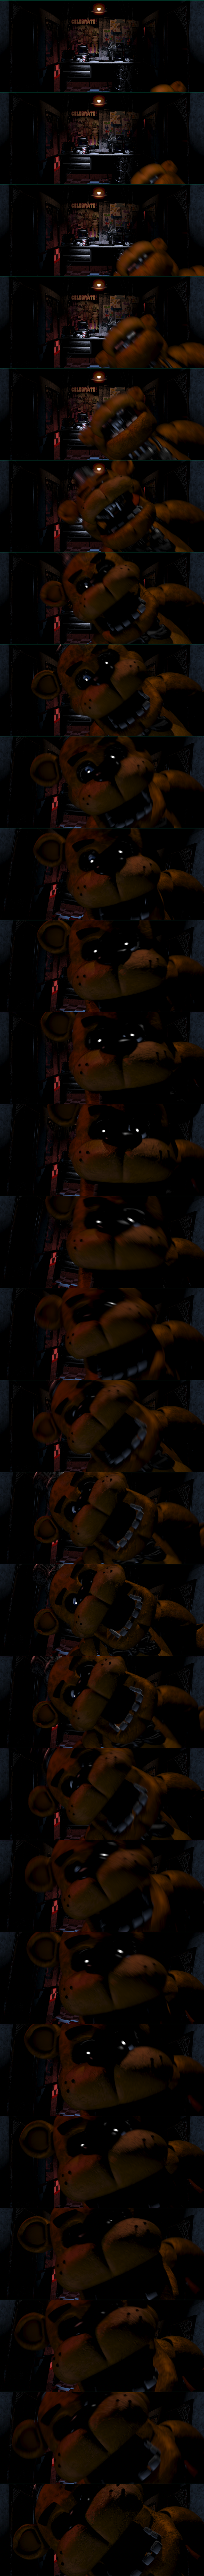 Five Nights at Freddy's - Freddy Jumpscare 2